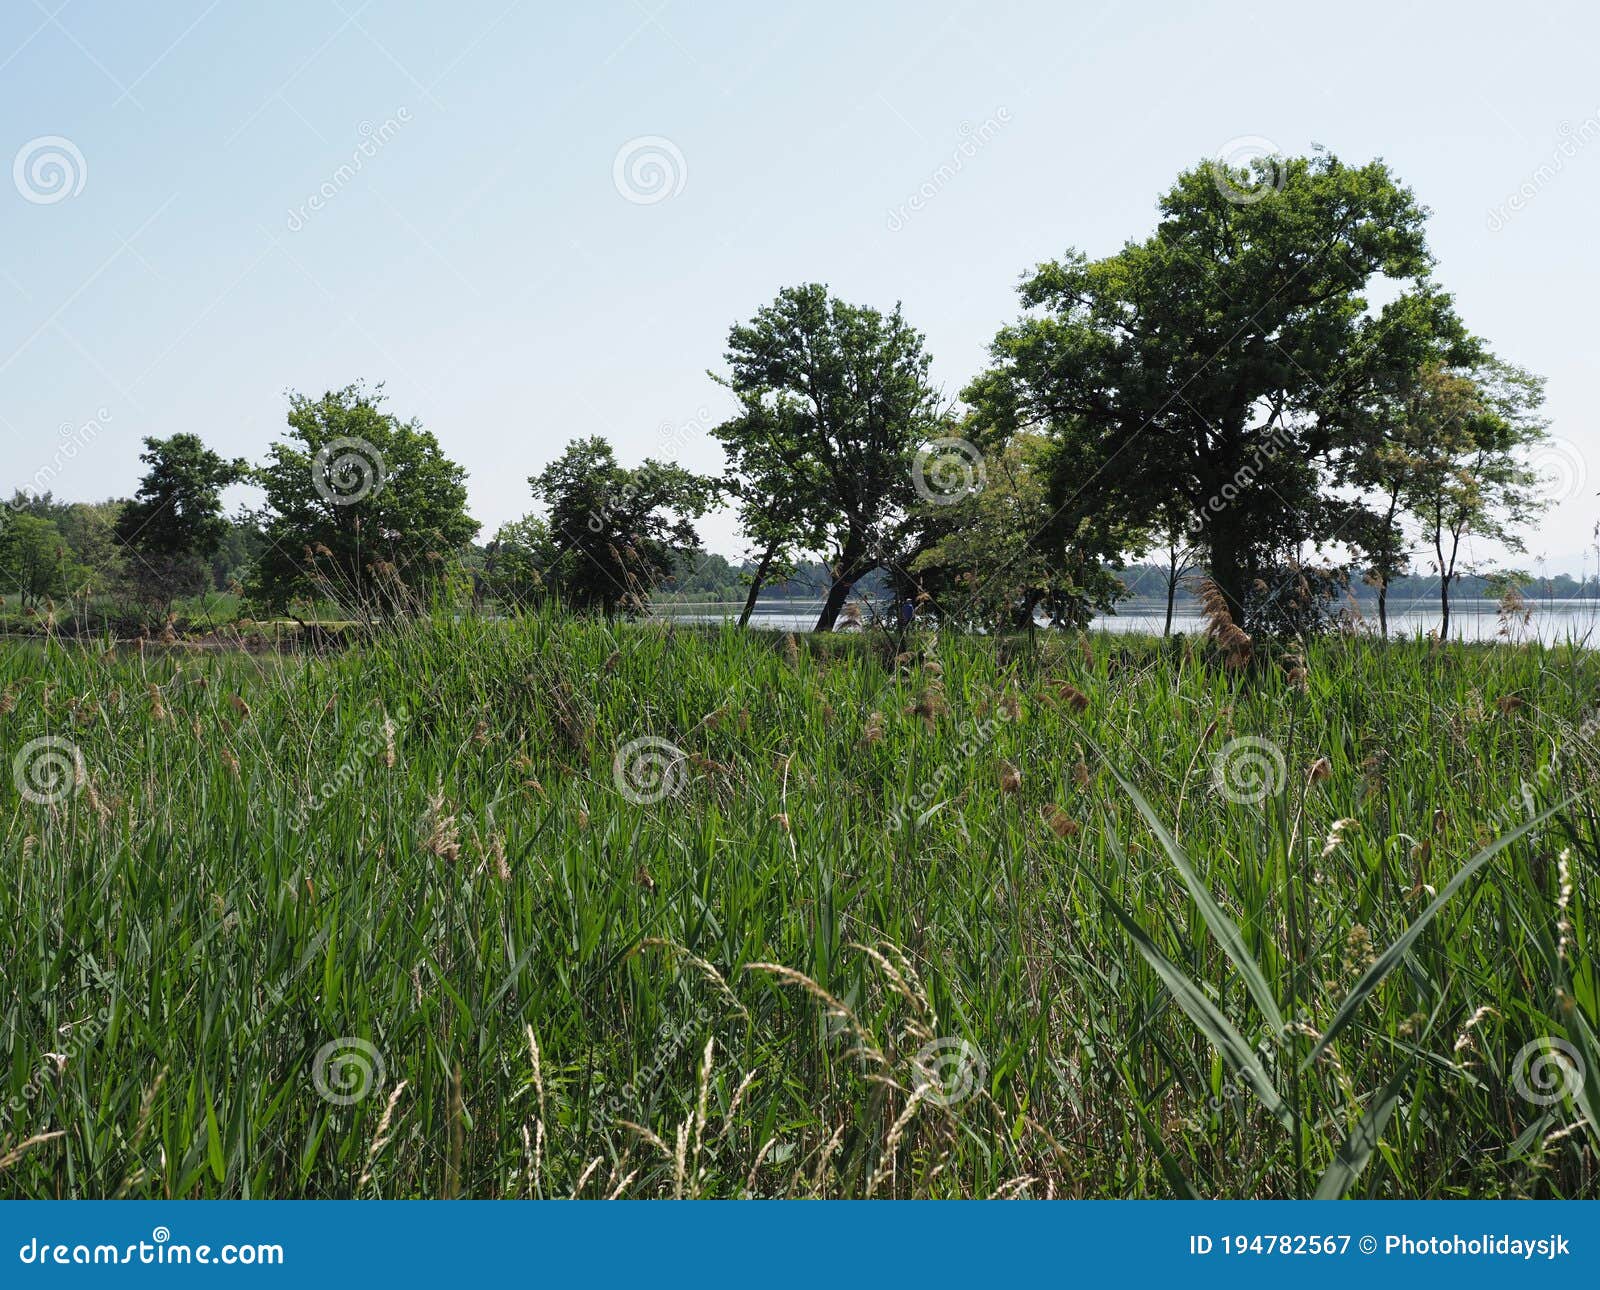 reed and trees on landscape of pond in goczalkowice town in poland